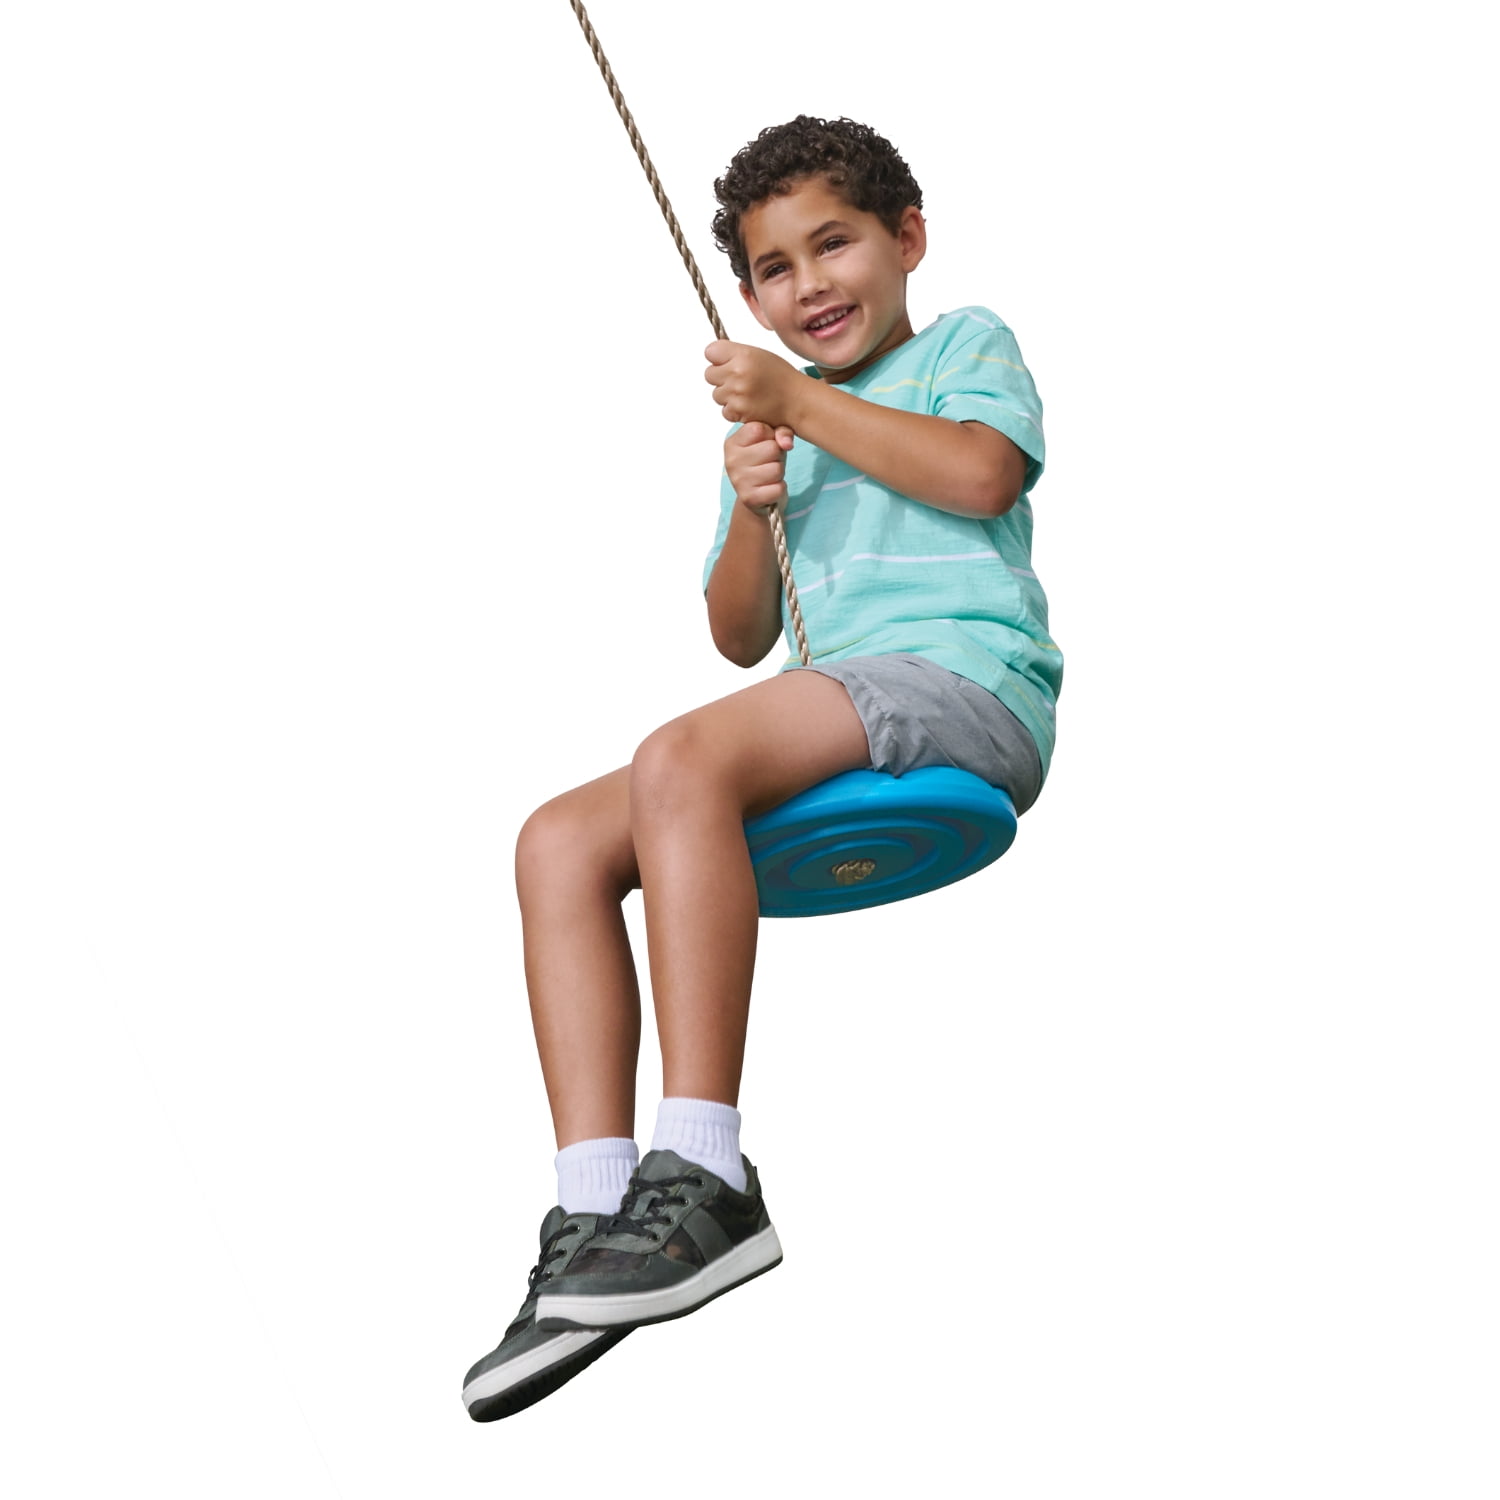 Play Day Rope Swing, Outdoor Adjustable Nylon Rope, Swing Set Accessory, Ages 3+